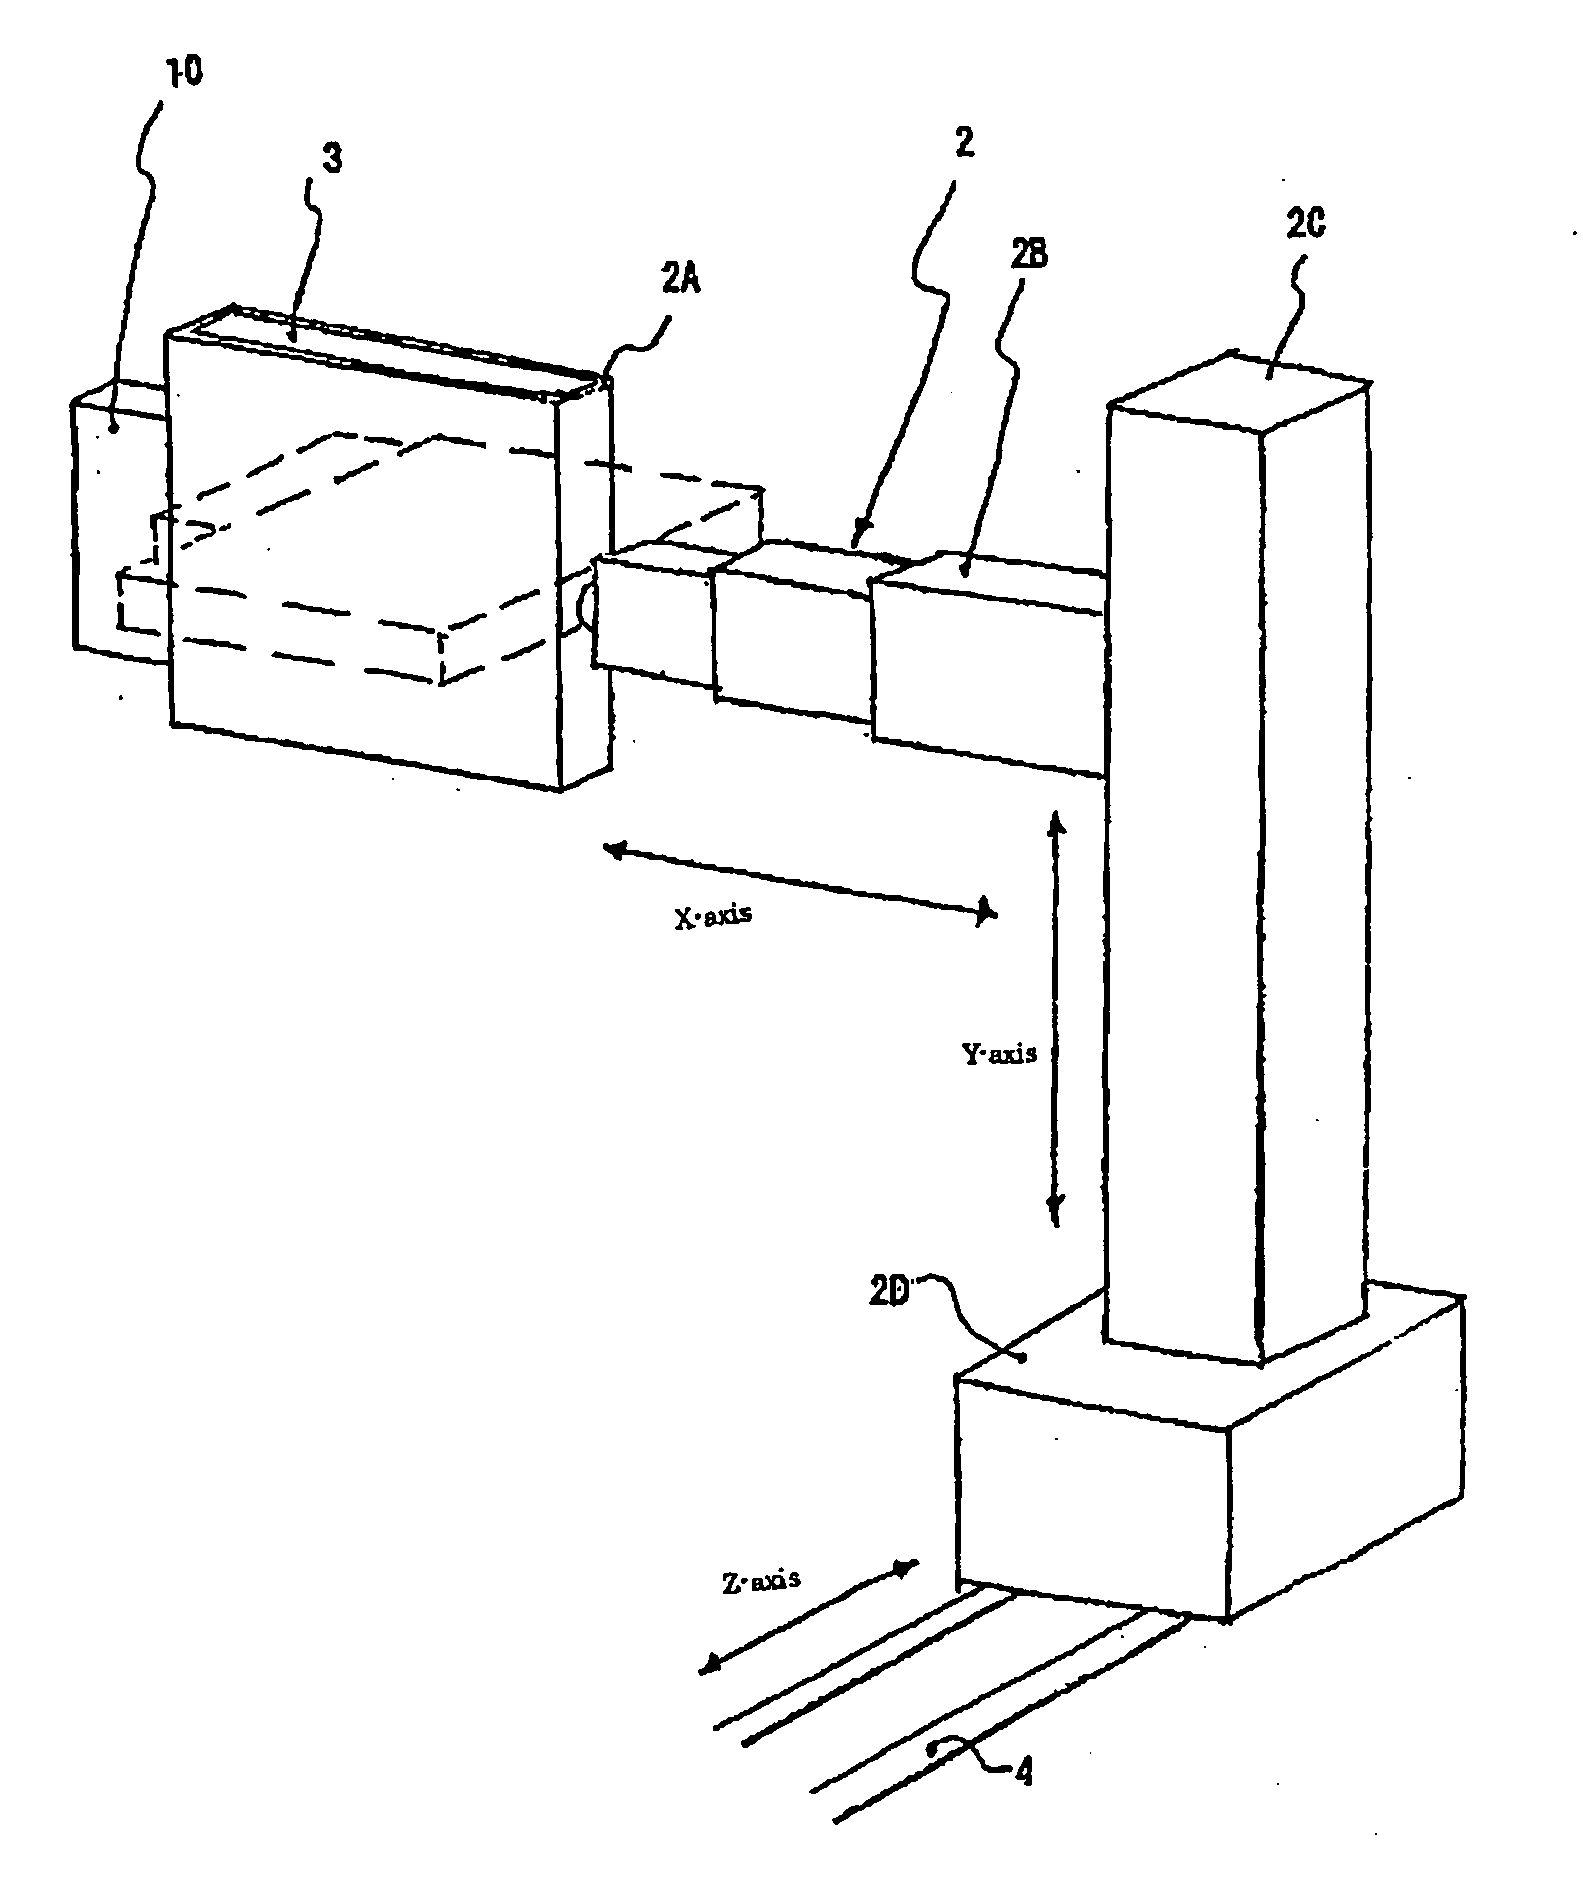 Support apparatus for X-ray detector